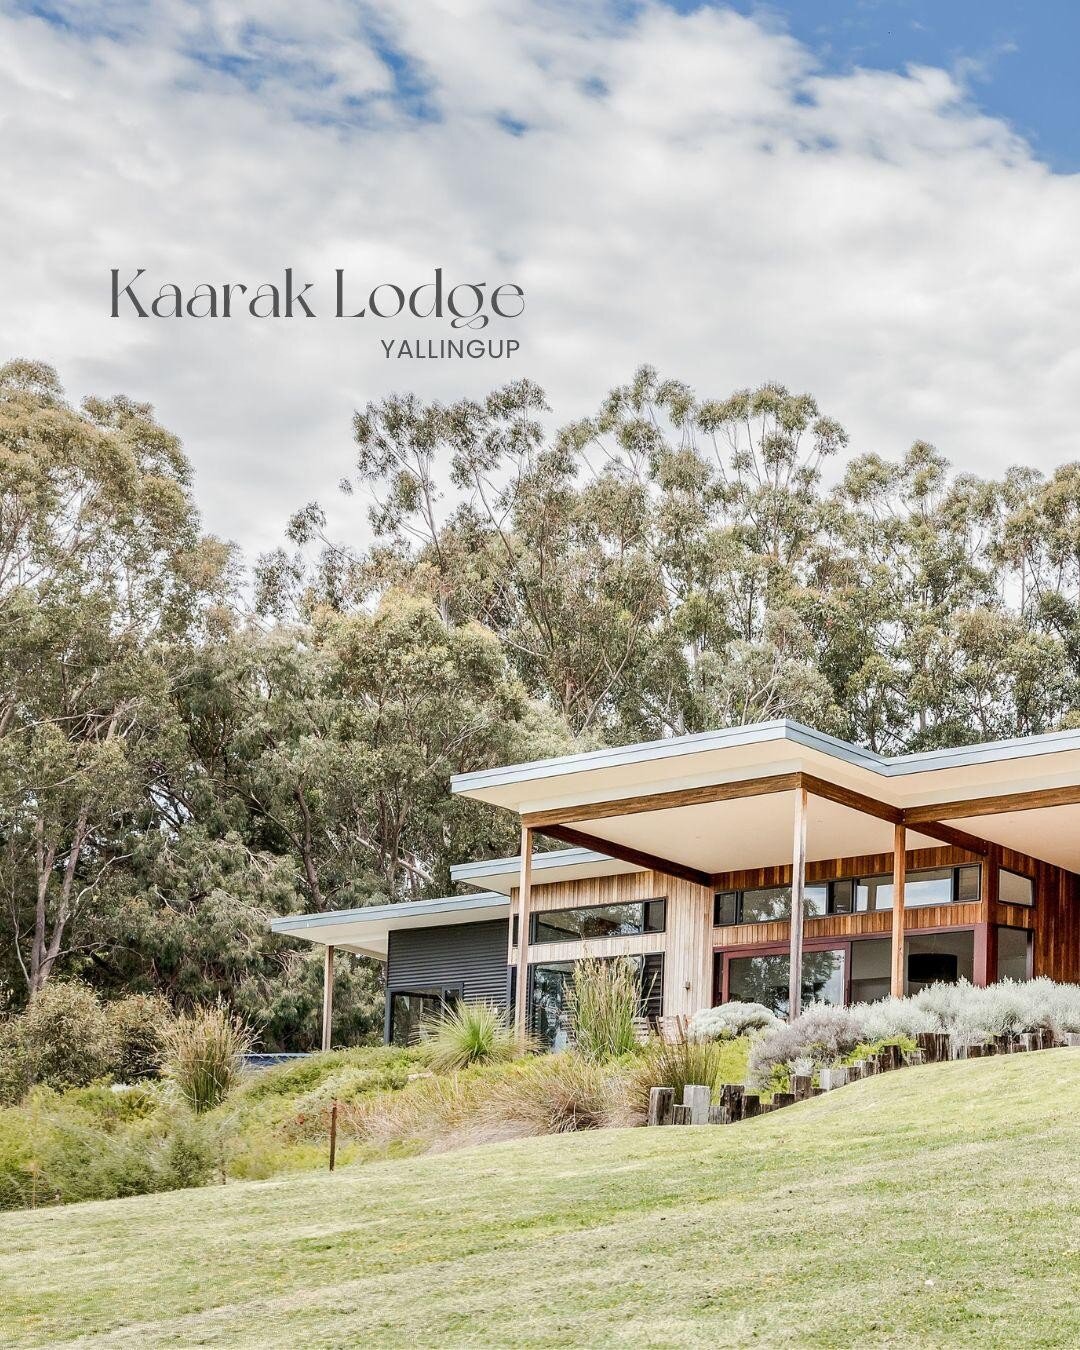 e a s t e r  a v a i l a b i l i t y 

Oh do we have a home to drool over ready for your Easter getaway.... Kaarak Lodge is one stunning vacay spot. Nestled in Yallingup Siding, this luxurious home truely feels like it's in its own hidden corner of t